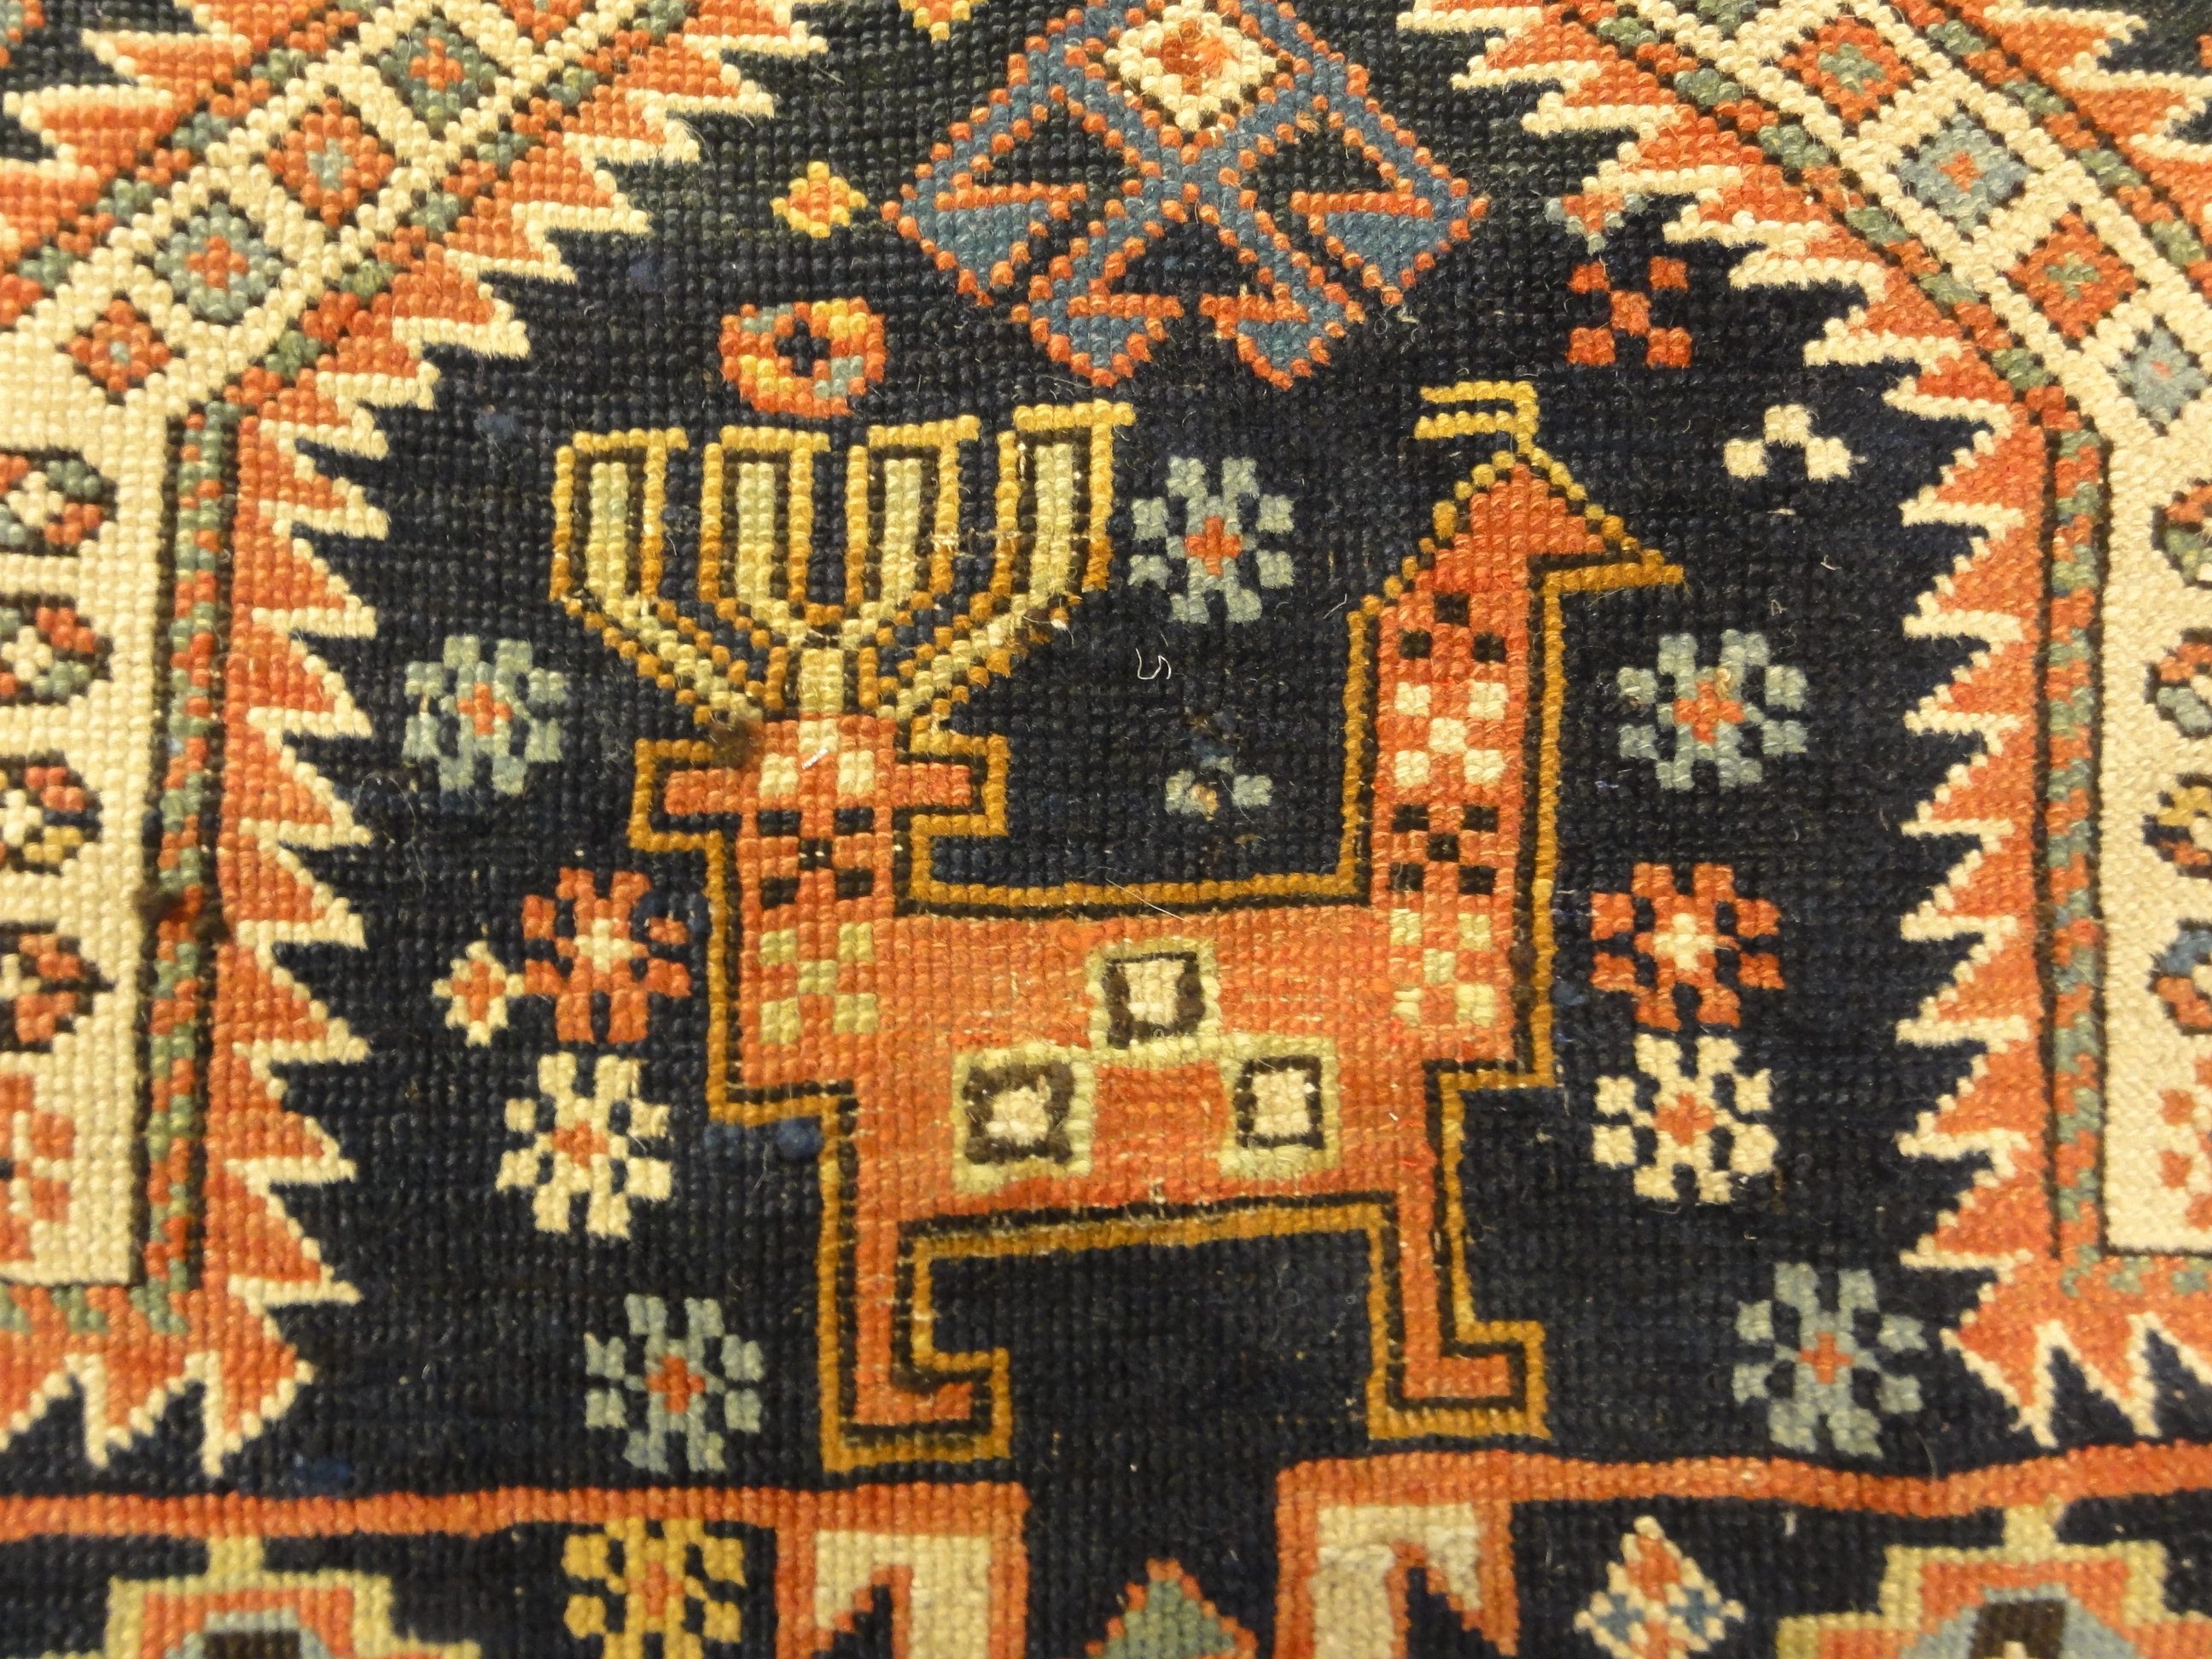 Antique Shirvan Rug Featuring Peacock and Two Men. A genuine authentic antique piece of woven carpet art sold by Santa Barbara Design Center, Rugs and More.